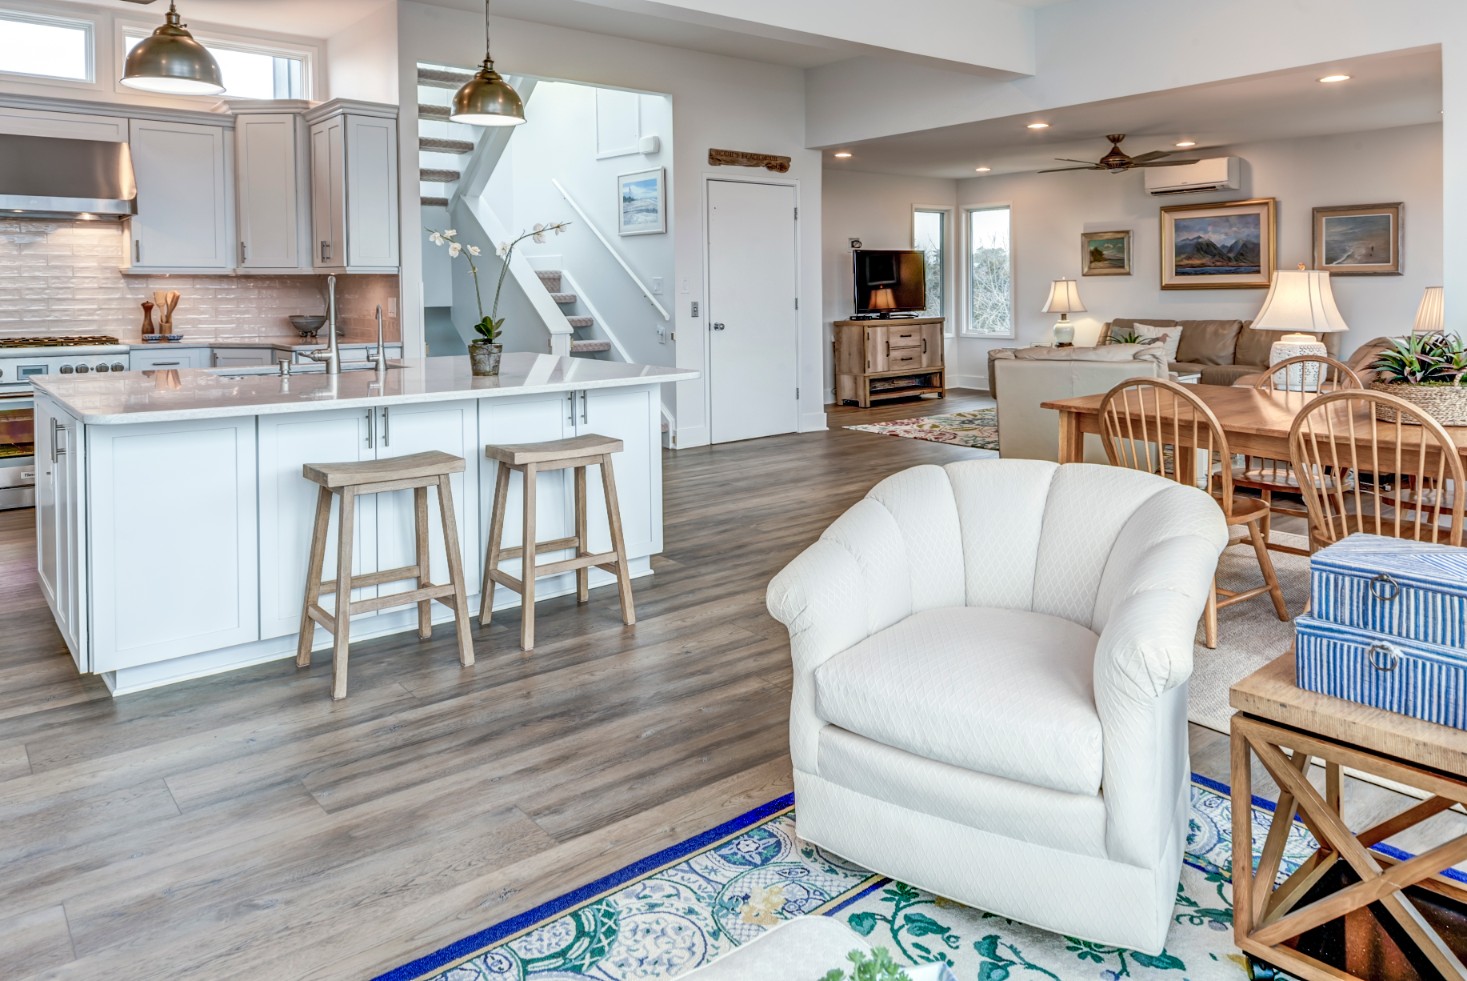 Cotton Patch Hills Renovation in Bethany Beach DE - Great Room with Kitchen Island